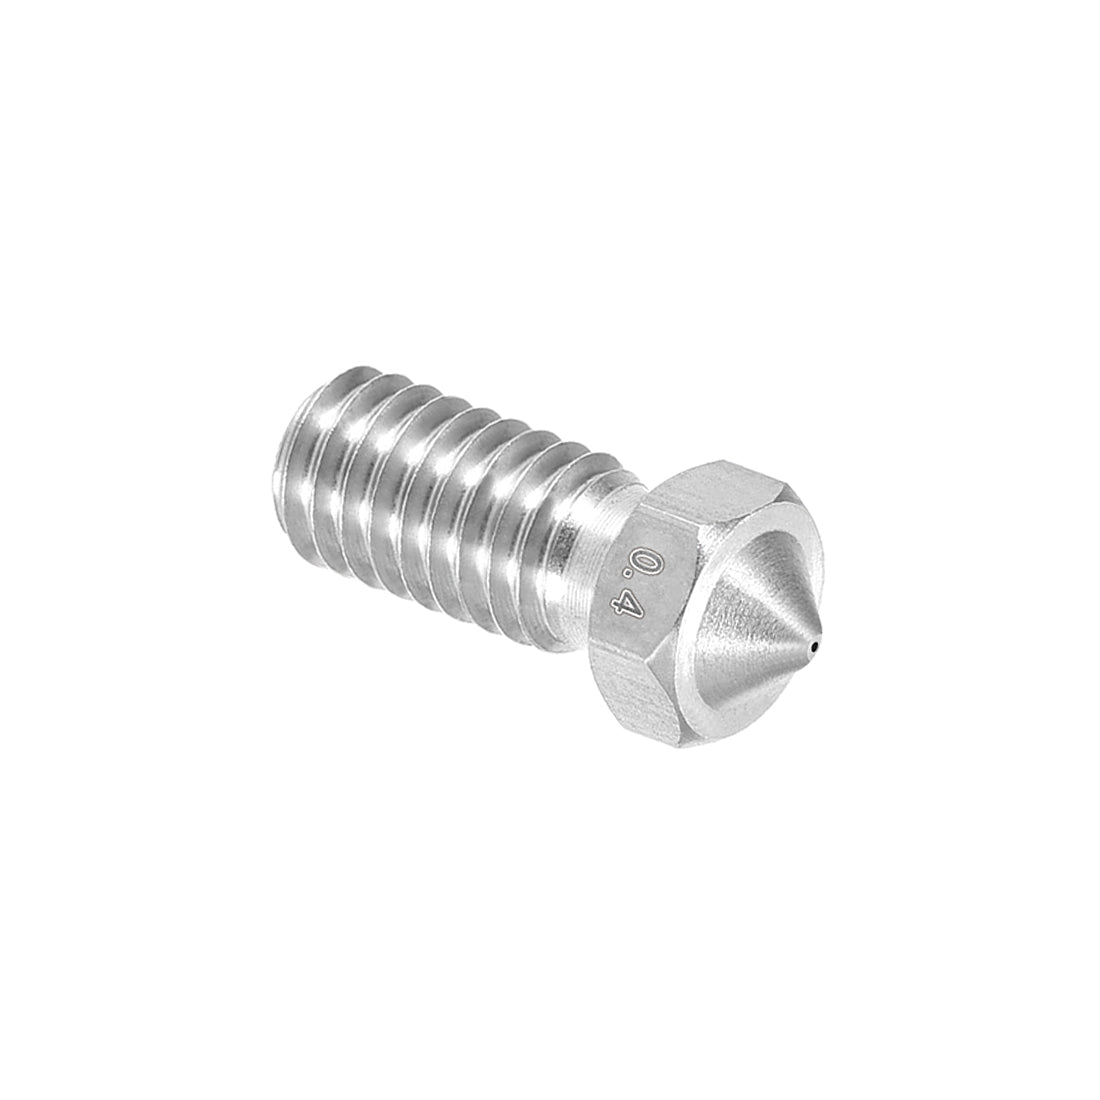 uxcell Uxcell 0.4mm 3D Printer Nozzle, Fit for V6, for 1.75mm Filament Stainless Steel 5pcs